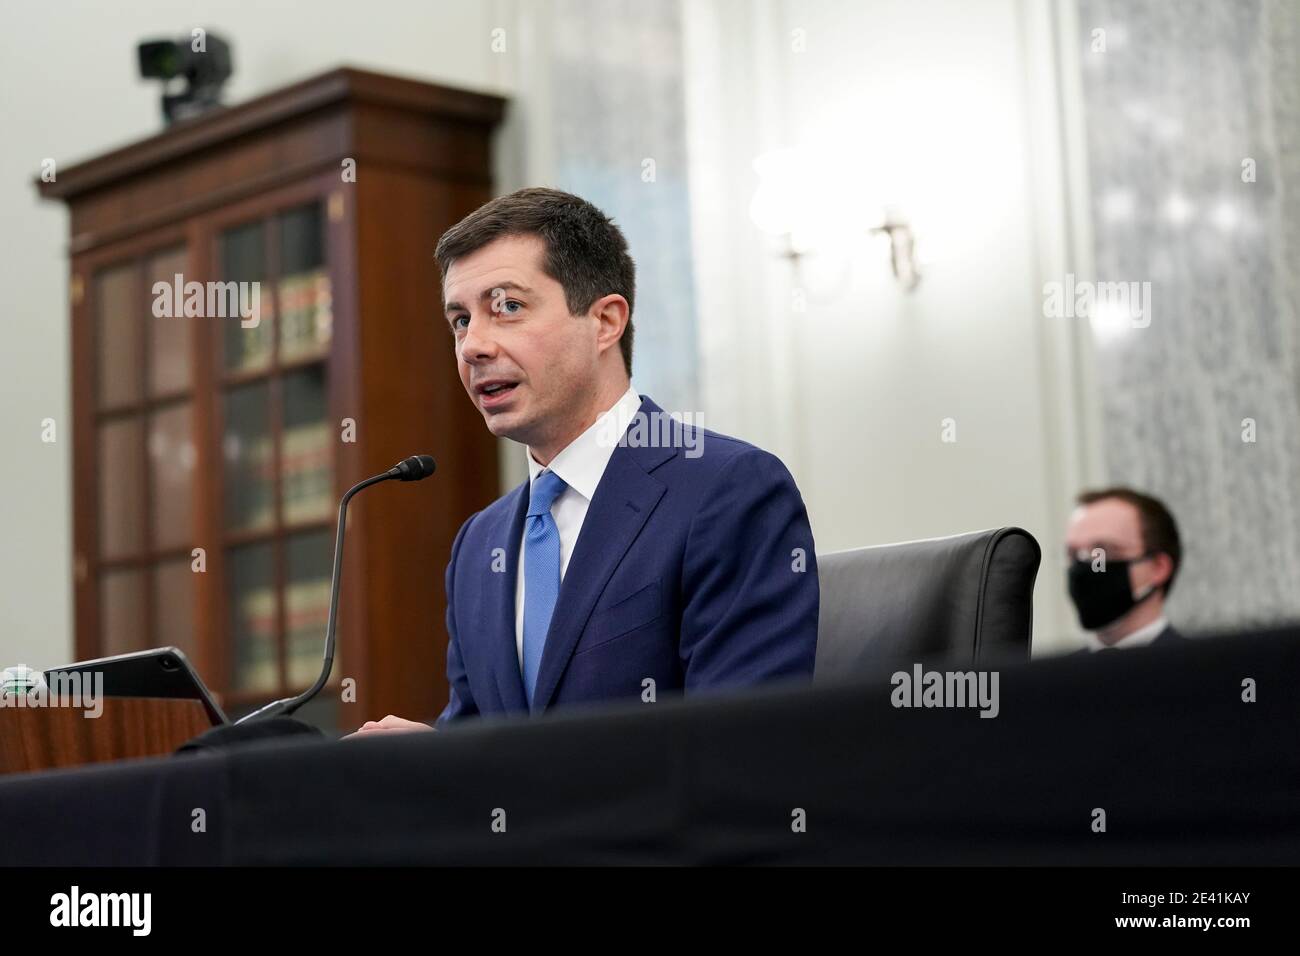 Washington, DC, USA. 21st Jan, 2021. Pete Buttigieg, U.S. secretary of transportation nominee for U.S. President Joe Biden, speaks during a Senate Commerce, Science and Transportation Committee confirmation hearing in Washington, DC, U.S., on Thursday, Jan. 21, 2021. Buttigieg, is pledging to carry out the administration's ambitious agenda to rebuild the nation's infrastructure, calling it a 'generational opportunity' to create new jobs, fight economic inequality and stem climate change.Credit: Stefani Reynolds/Pool via CNP | usage worldwide Credit: dpa/Alamy Live News Stock Photo